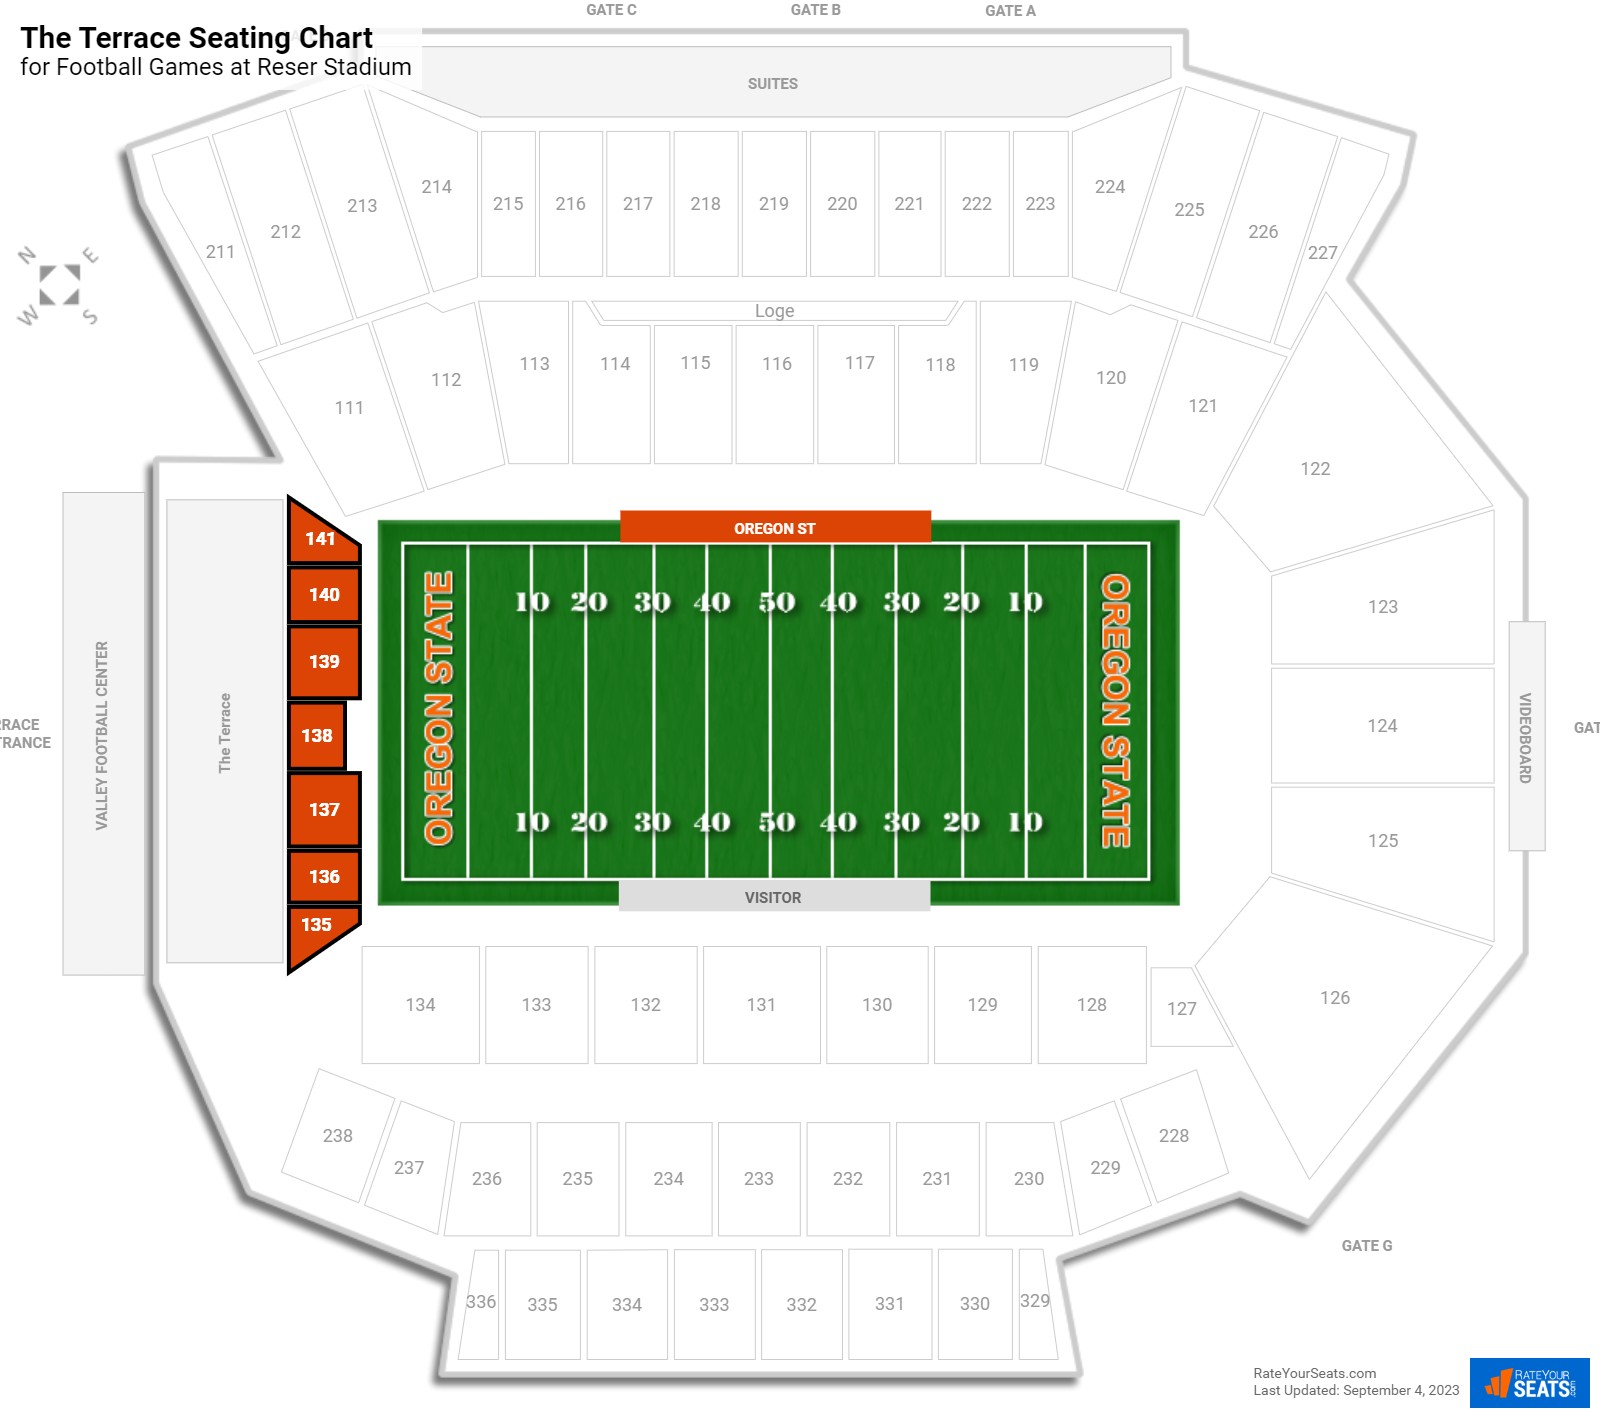 Football The Terrace Seating Chart at Reser Stadium